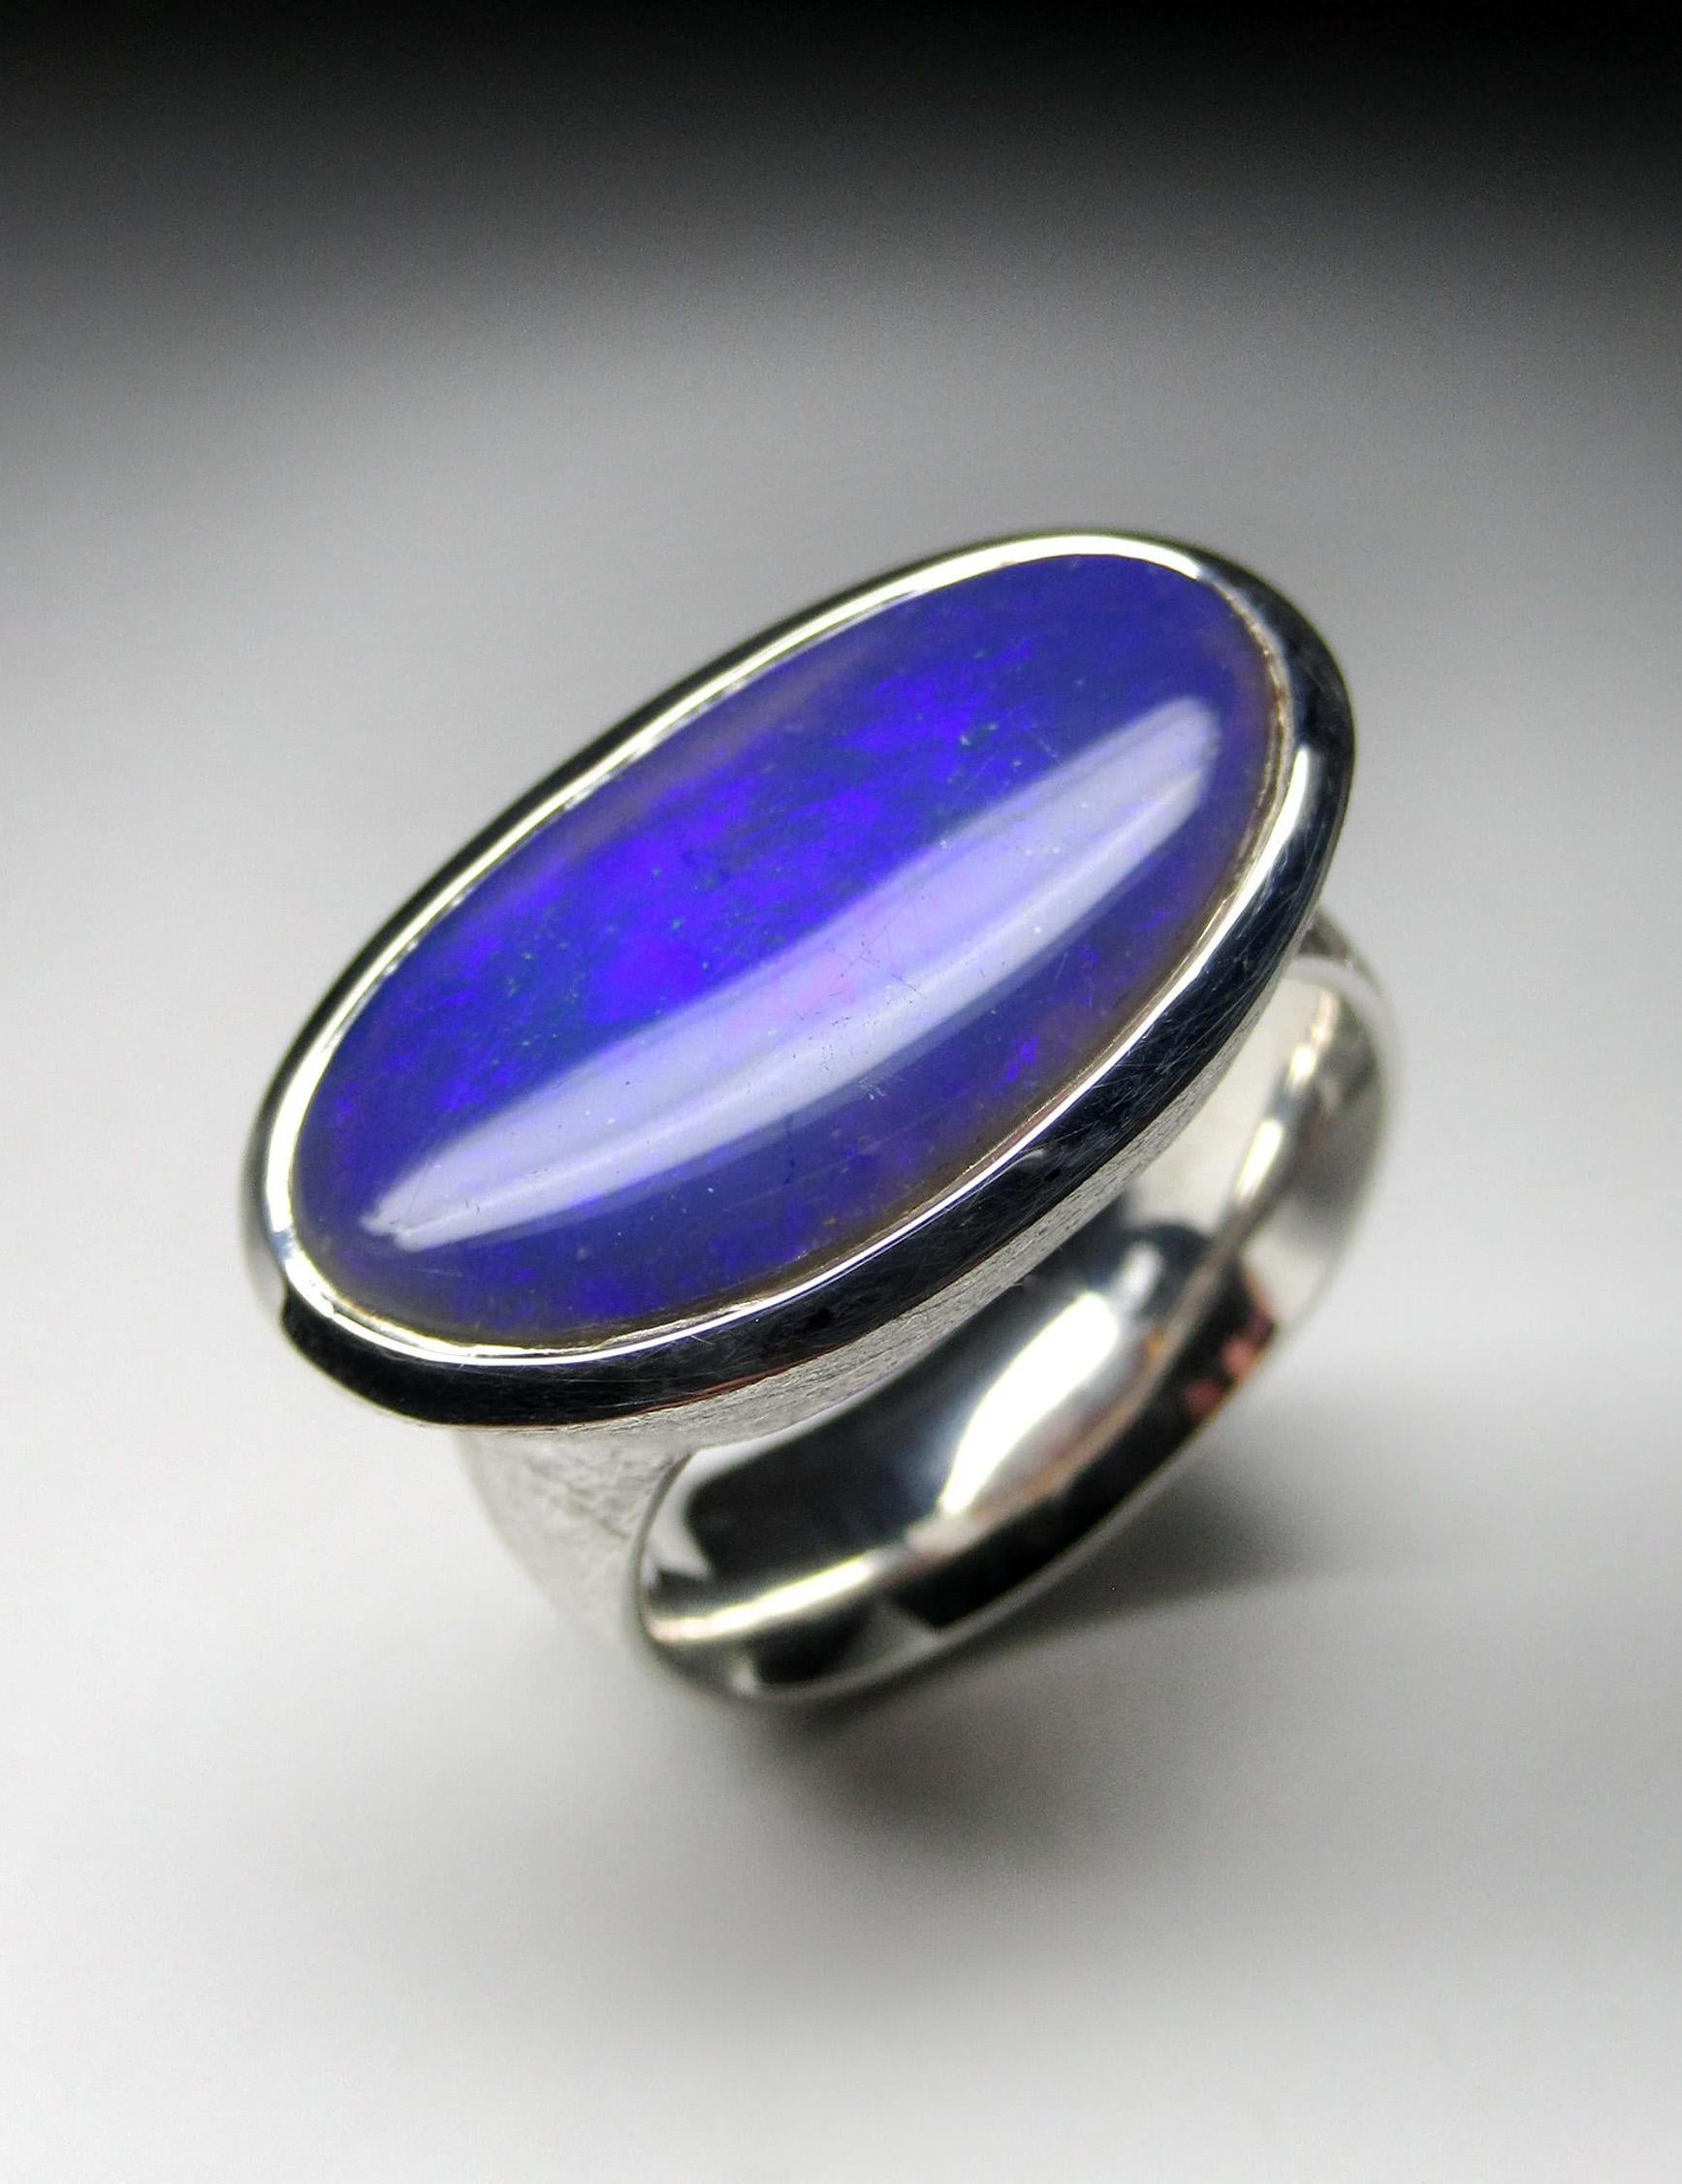 Large matte finish silver ring with natural Black Opal 
gemstone origin - Australia
opal measurements - 0.12 x 0.51 x 0.91 in / 3 x 13 x 23 mm
opal weight - 8.55 carats
ring size - 8.5 US
ring weight - 12.31 grams


We ship our jewelry worldwide –